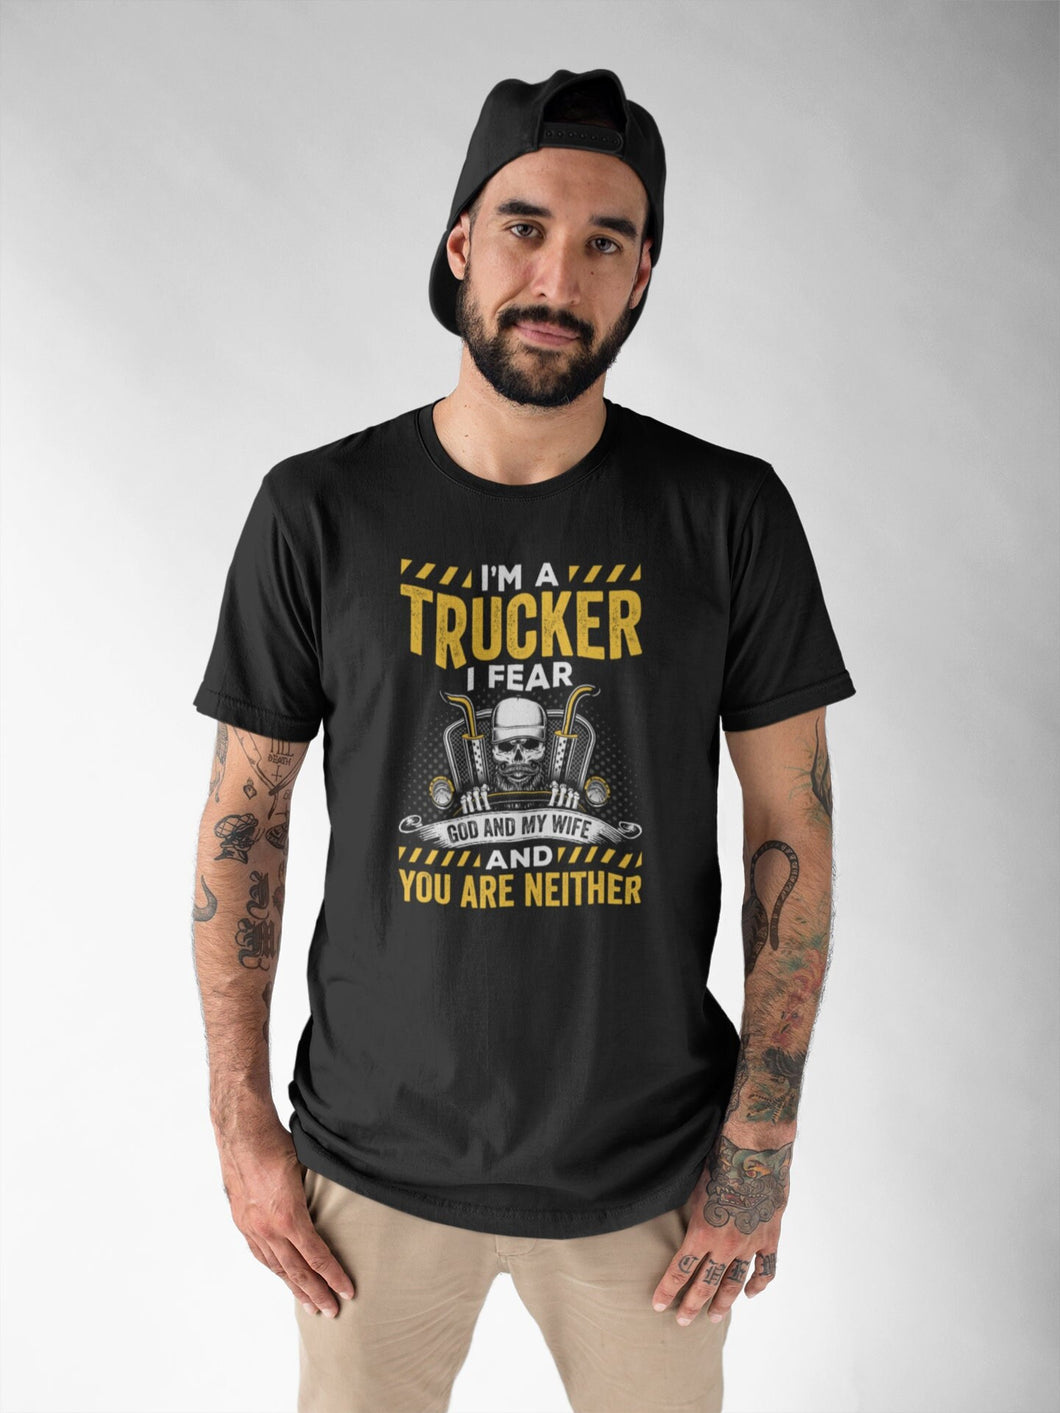 I'm A Trucker I Fear God And Wife And You Are Neither Shirt, Truck Driver Birthday, Truck Driver Gifts